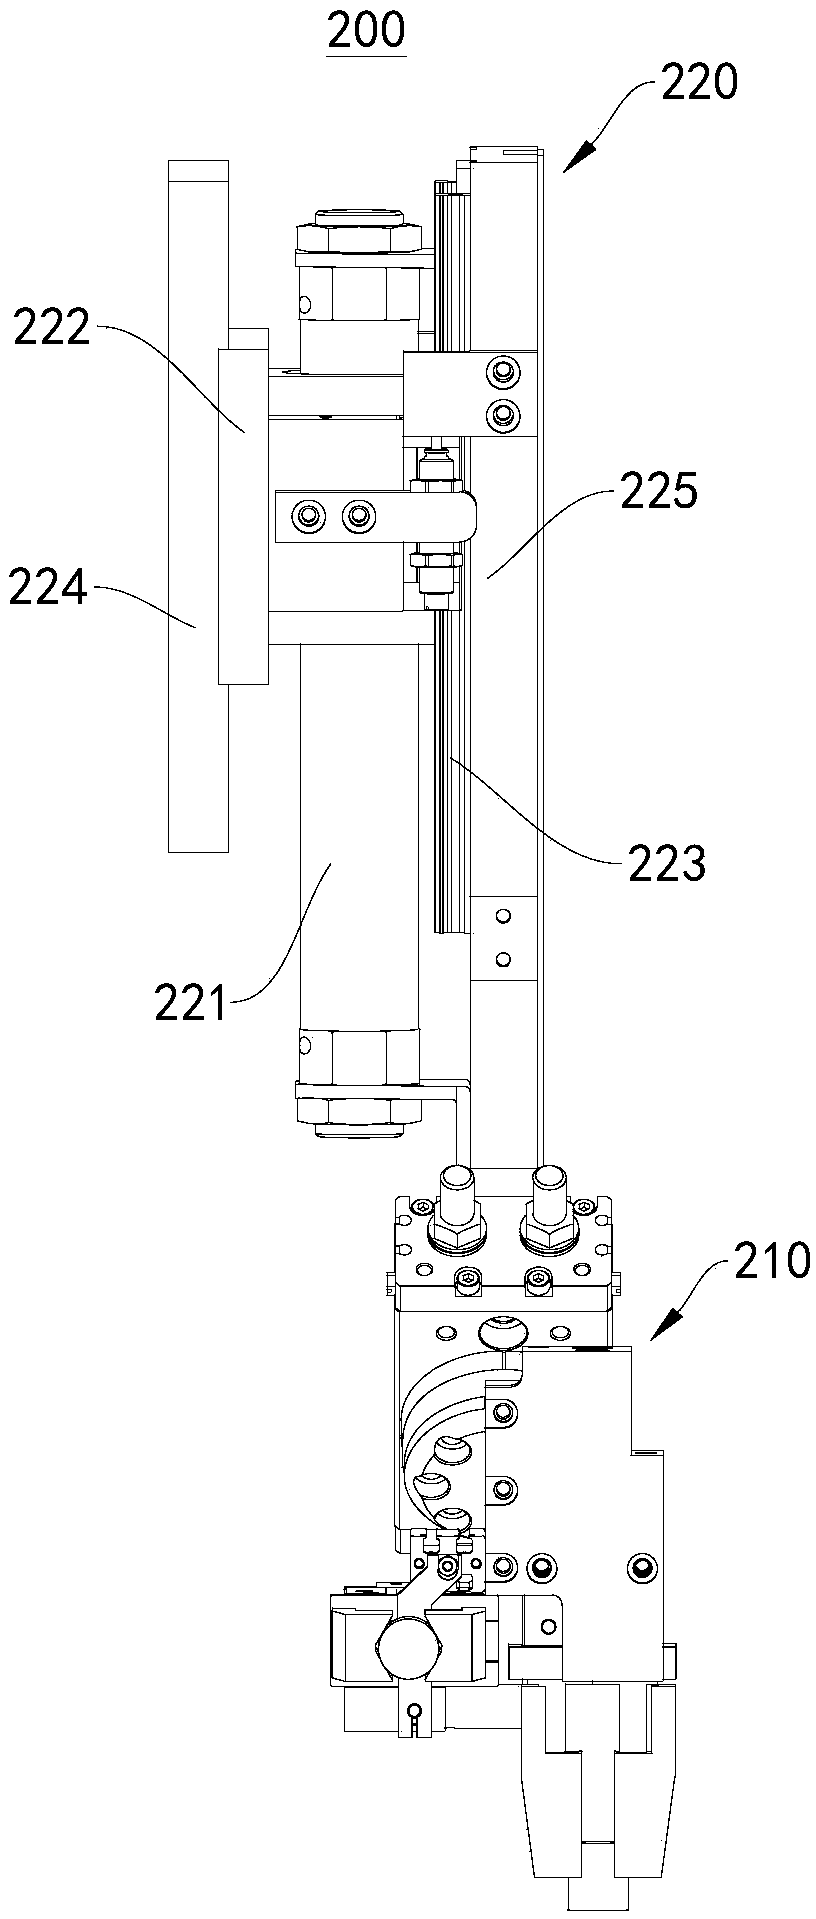 Loading and unloading device for lathe